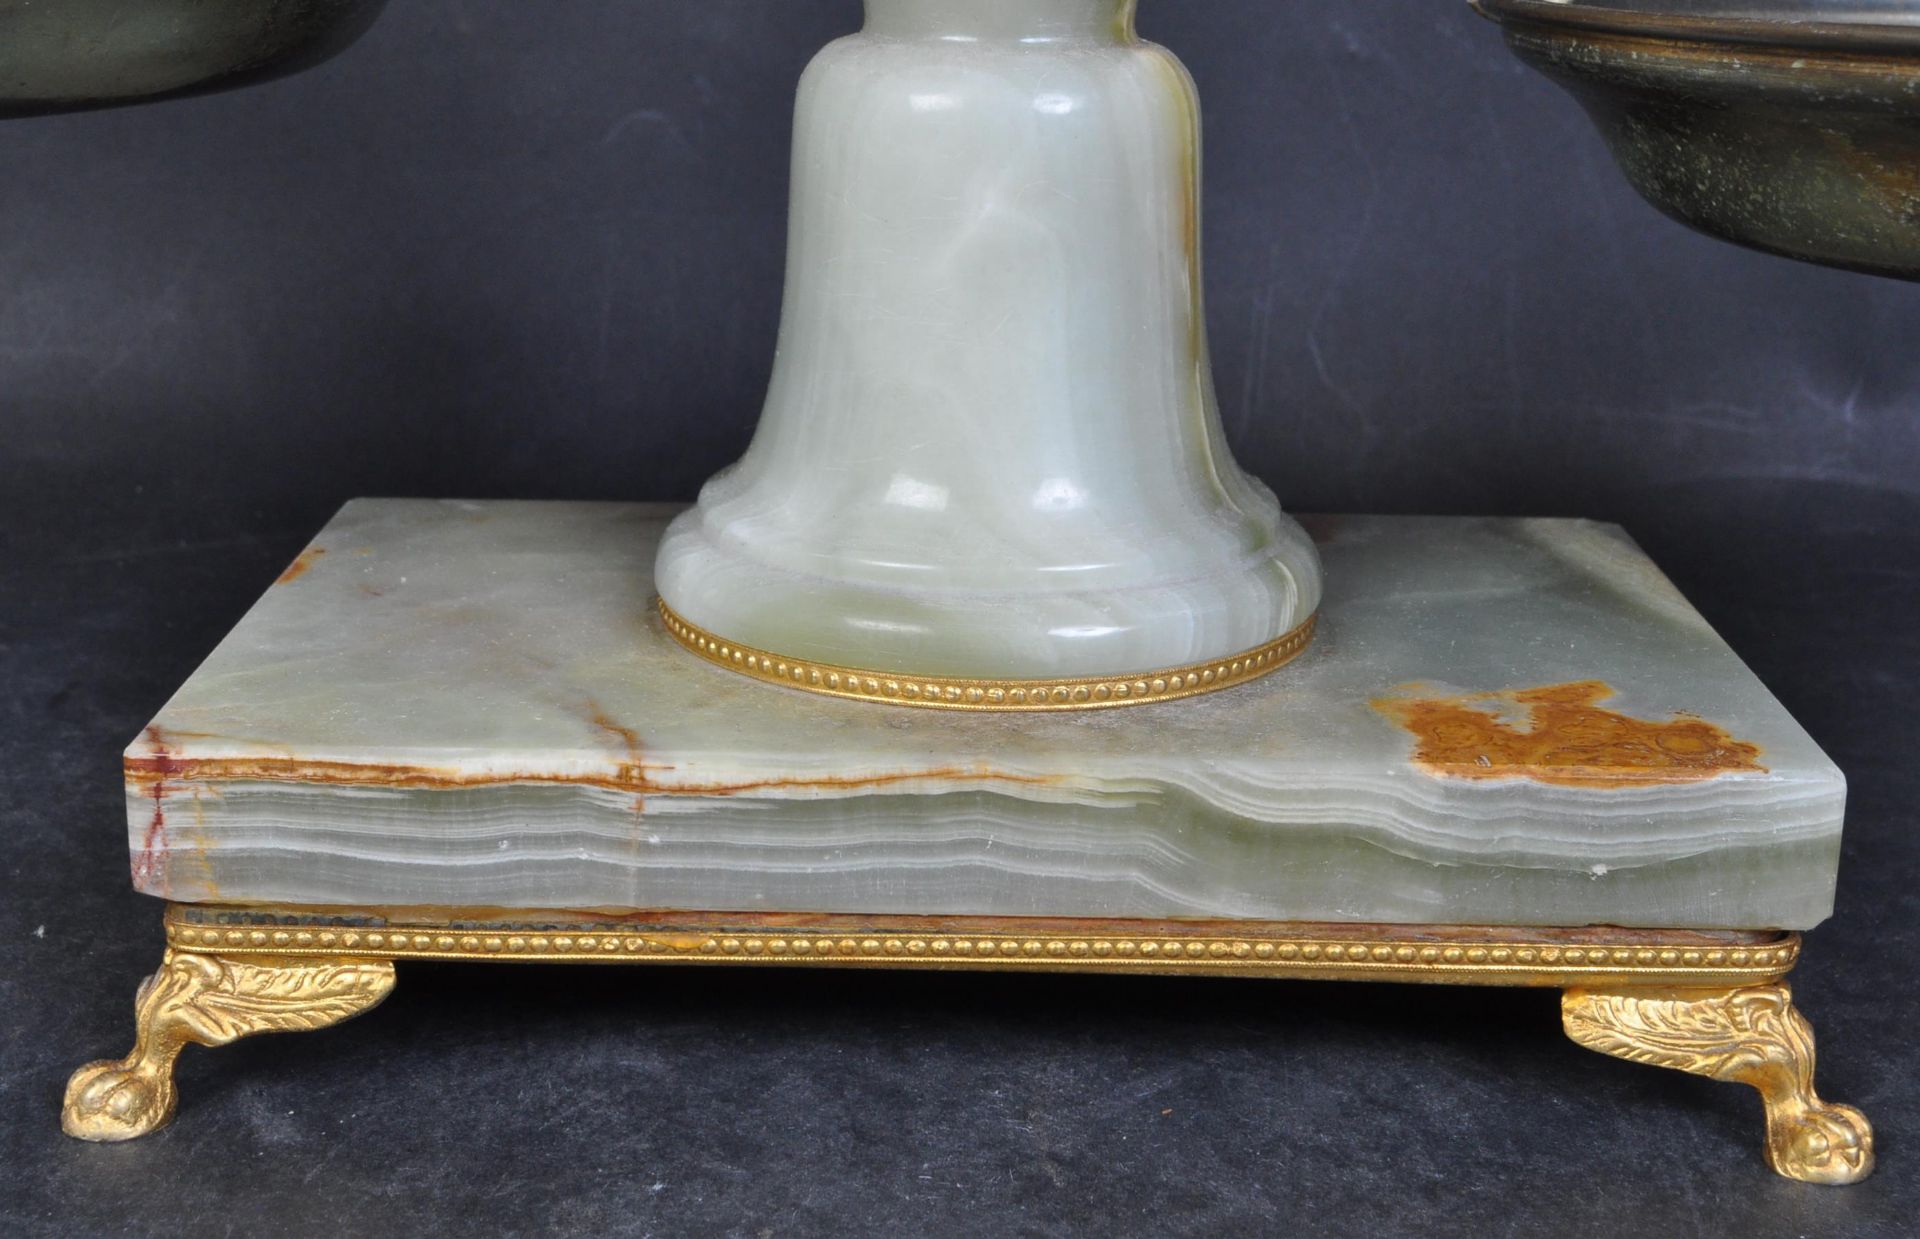 ONYX AND BRASS WEIGHING SCALES - Image 2 of 5